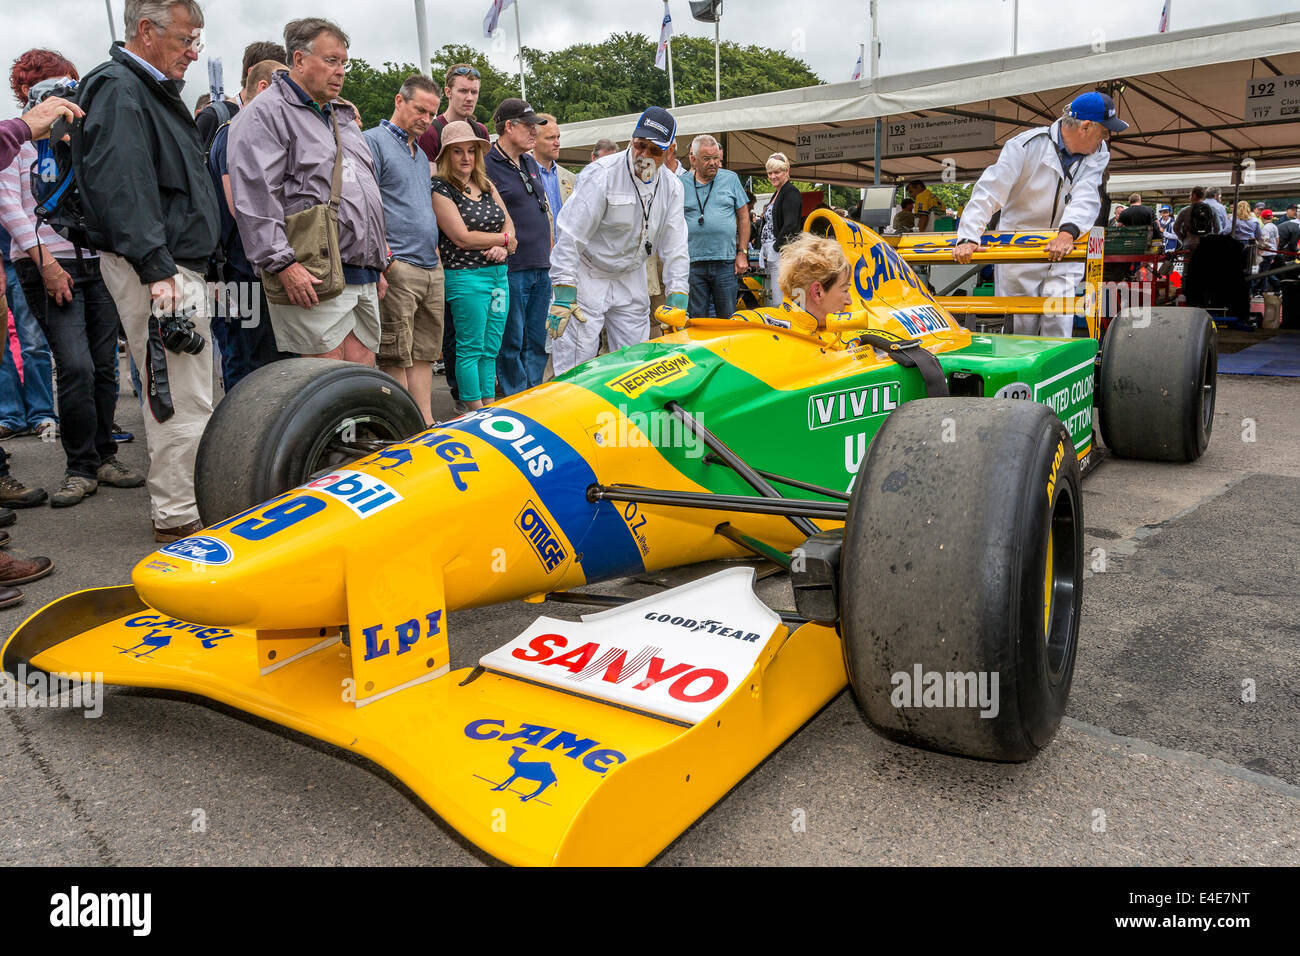 1992 Benetton-Ford B192 in the paddock with driver Lorina McLaughlin. 2014  Goodwood Festival of Speed, Sussex, UK Stock Photo - Alamy